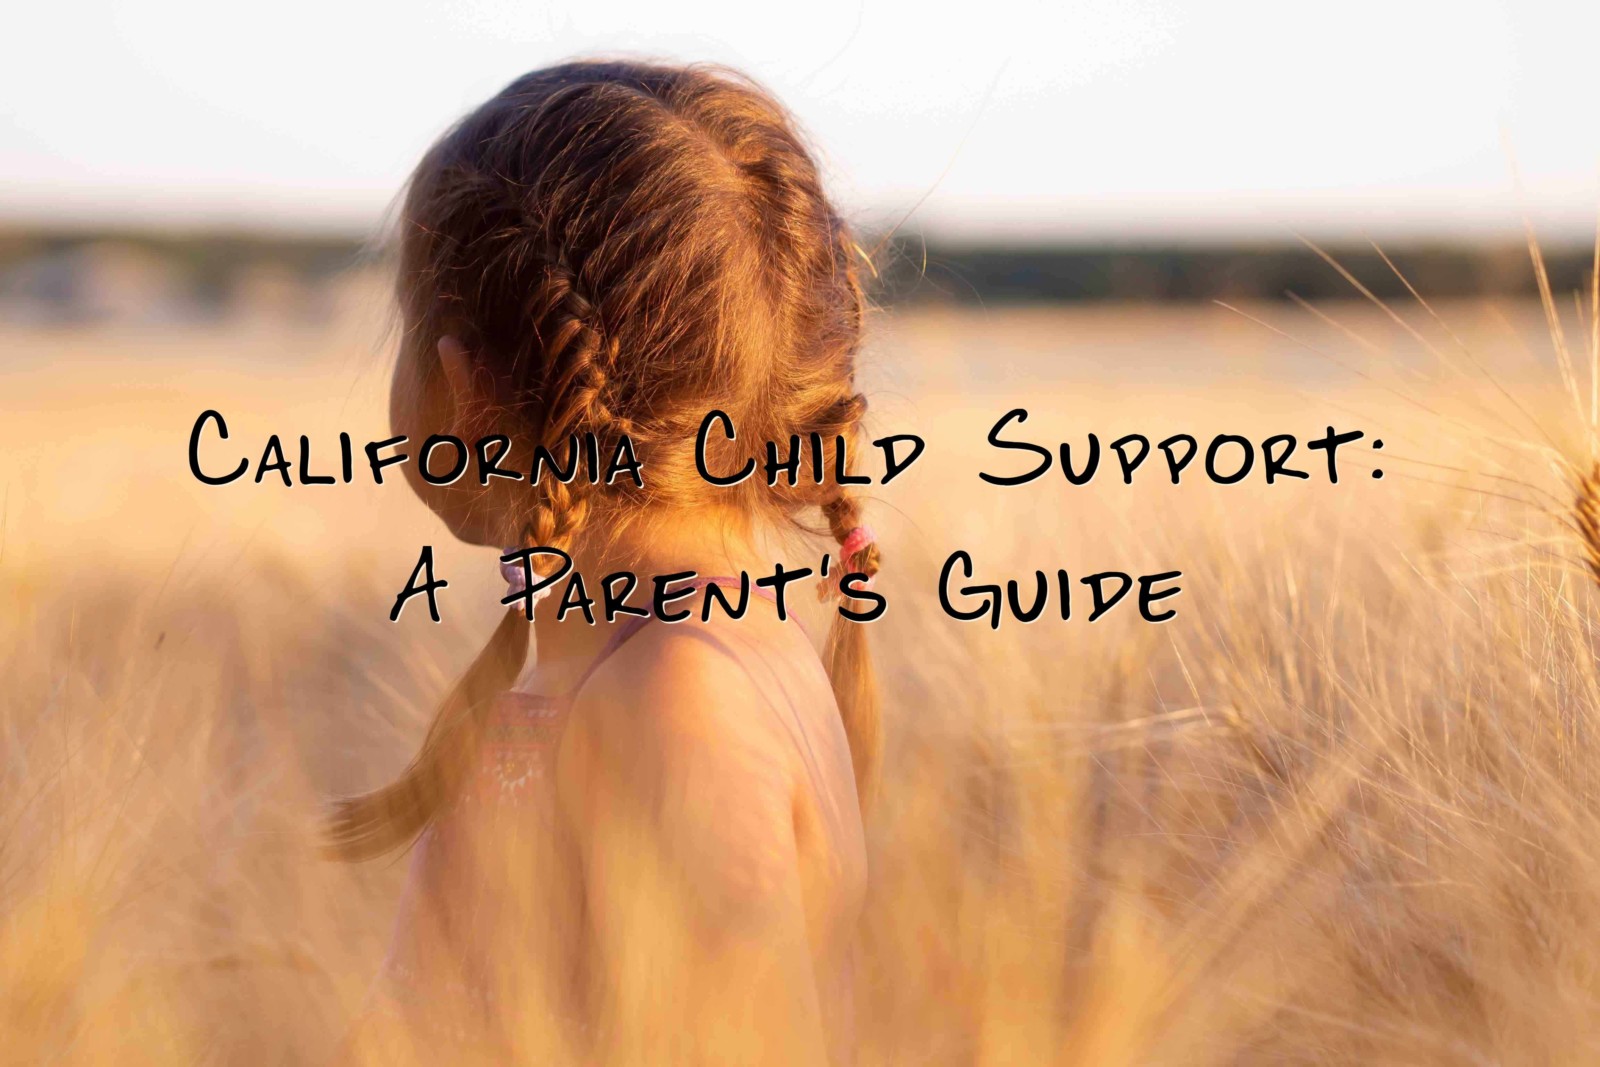 california child support a parent's guide